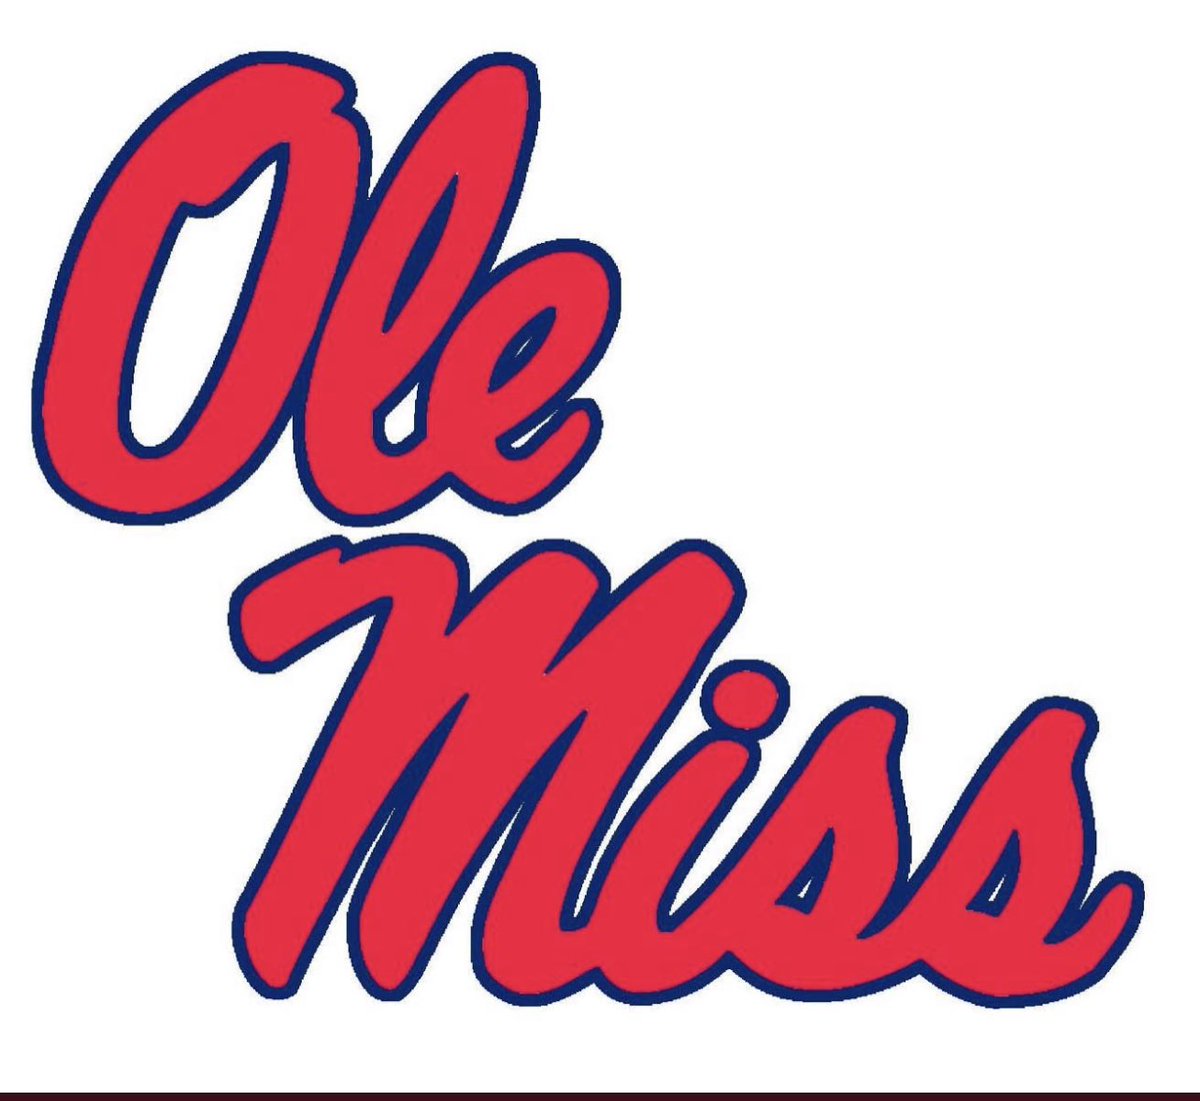 Can’t thank Coach Geno DeMarco and the staff at Geneva enough for an amazing Season I truly believe God gives his toughest battles to his toughest soldiers. Extremely Blessed & Fired up to be joining the Best Staff in the Country. #HottyToddy 1-0 ProMindSet #BandCamp